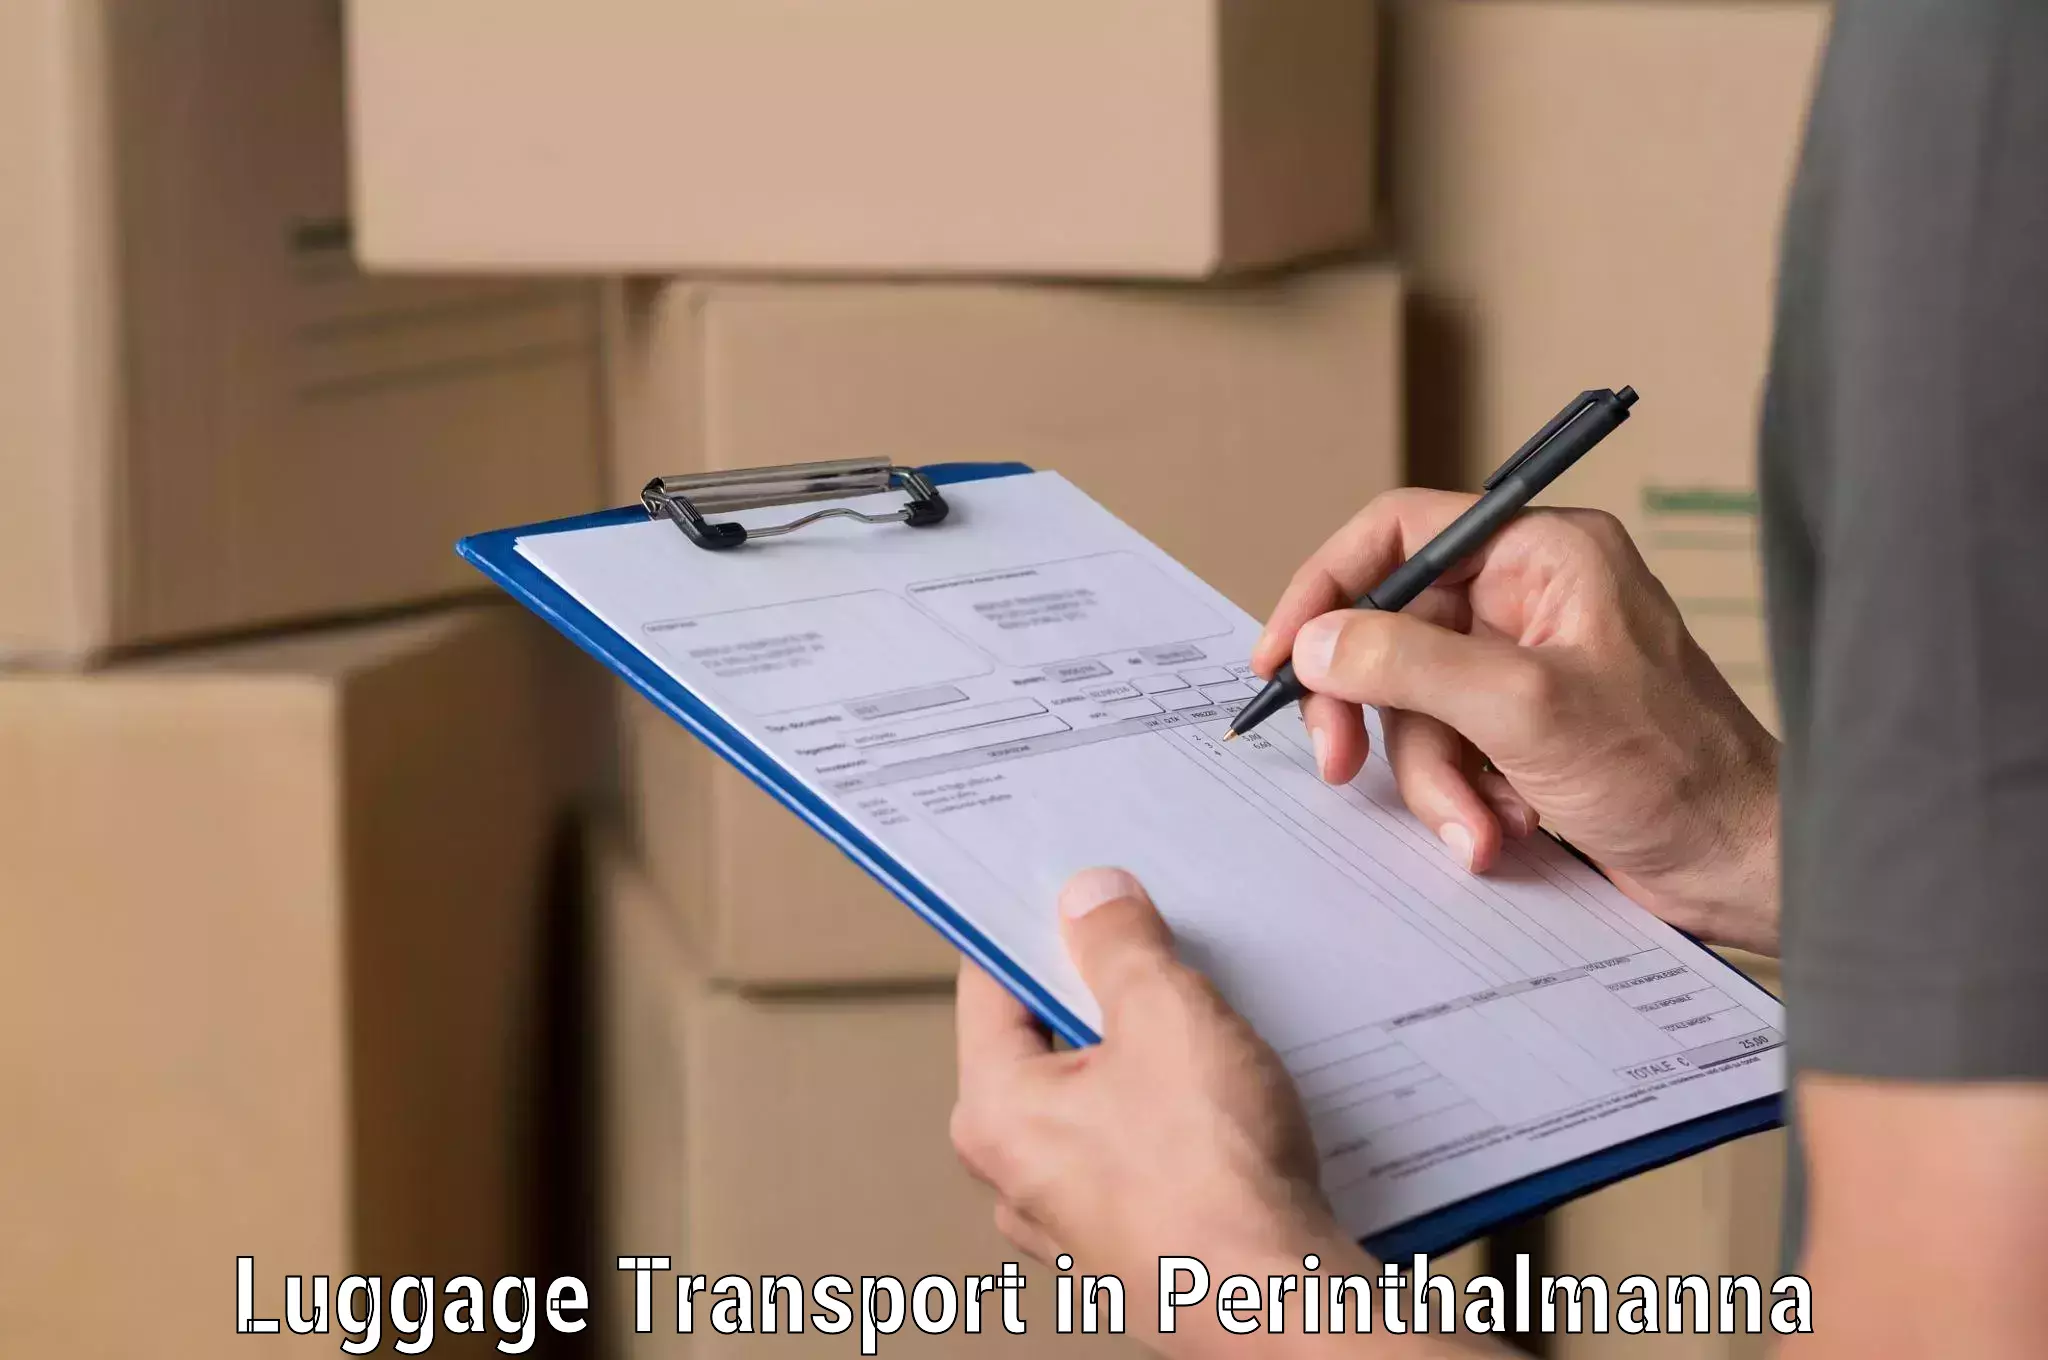 Online luggage shipping booking in Perinthalmanna